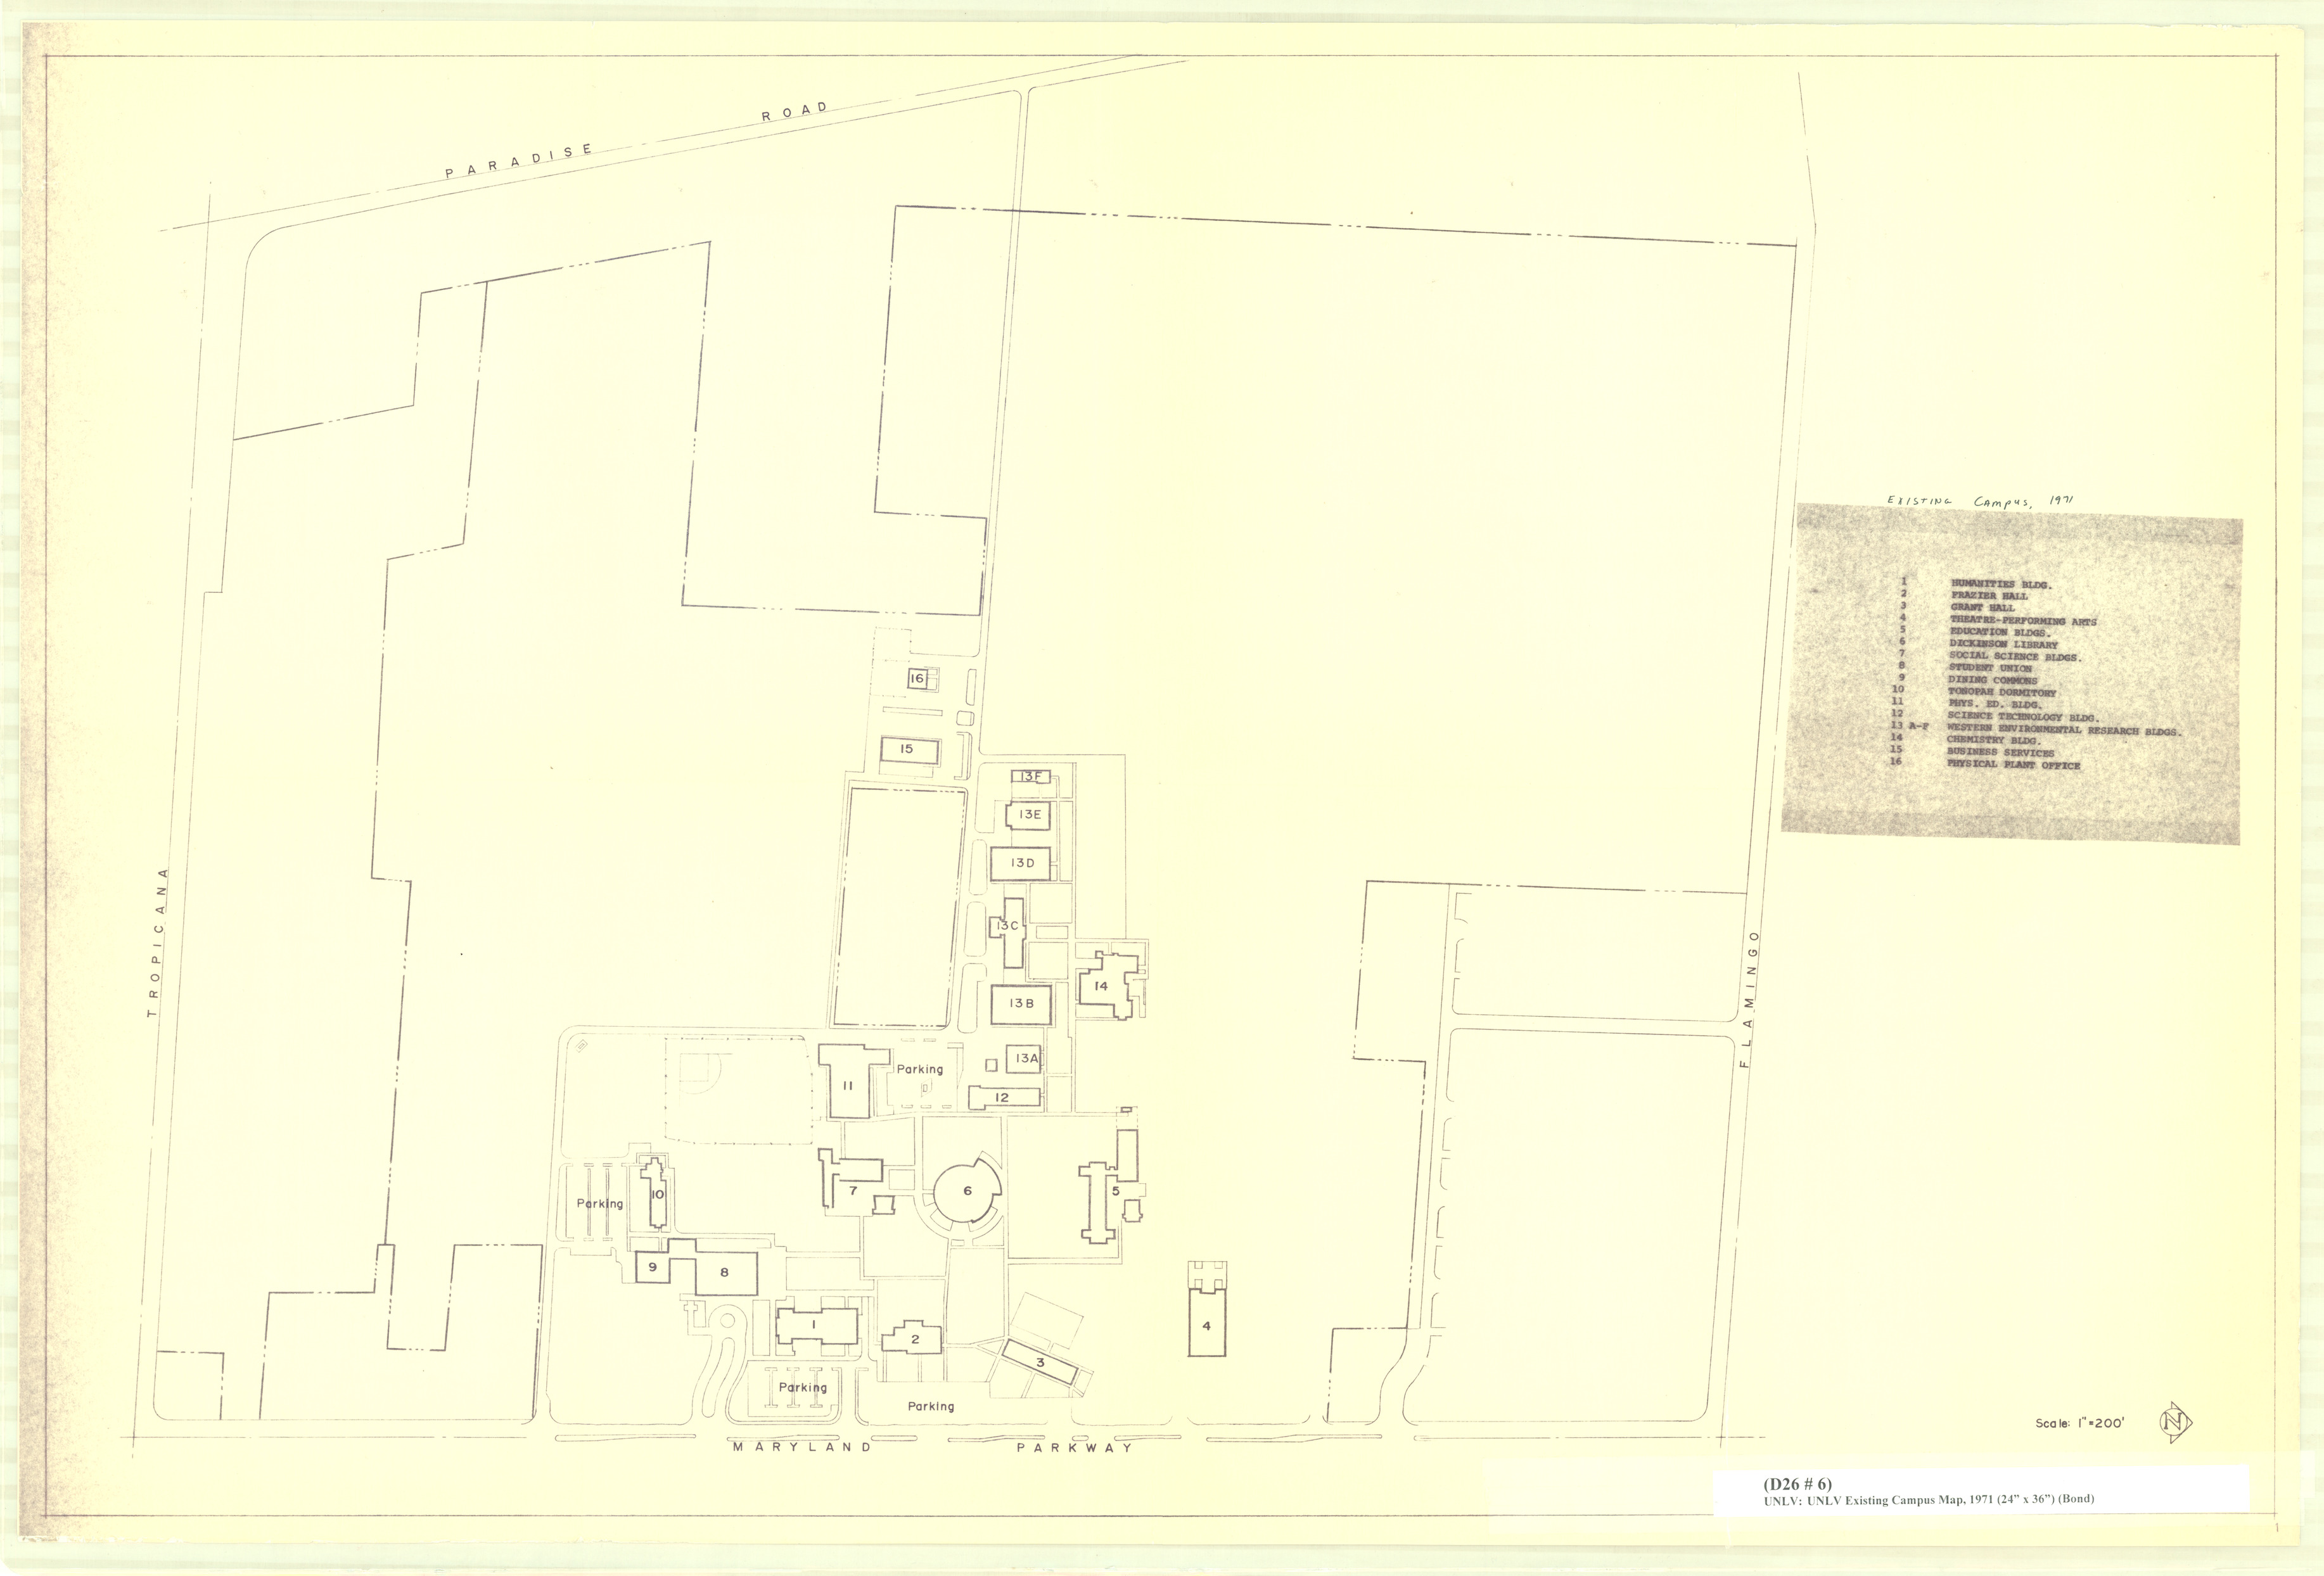 Nevada Southern University master plan: architectural drawings, image 004